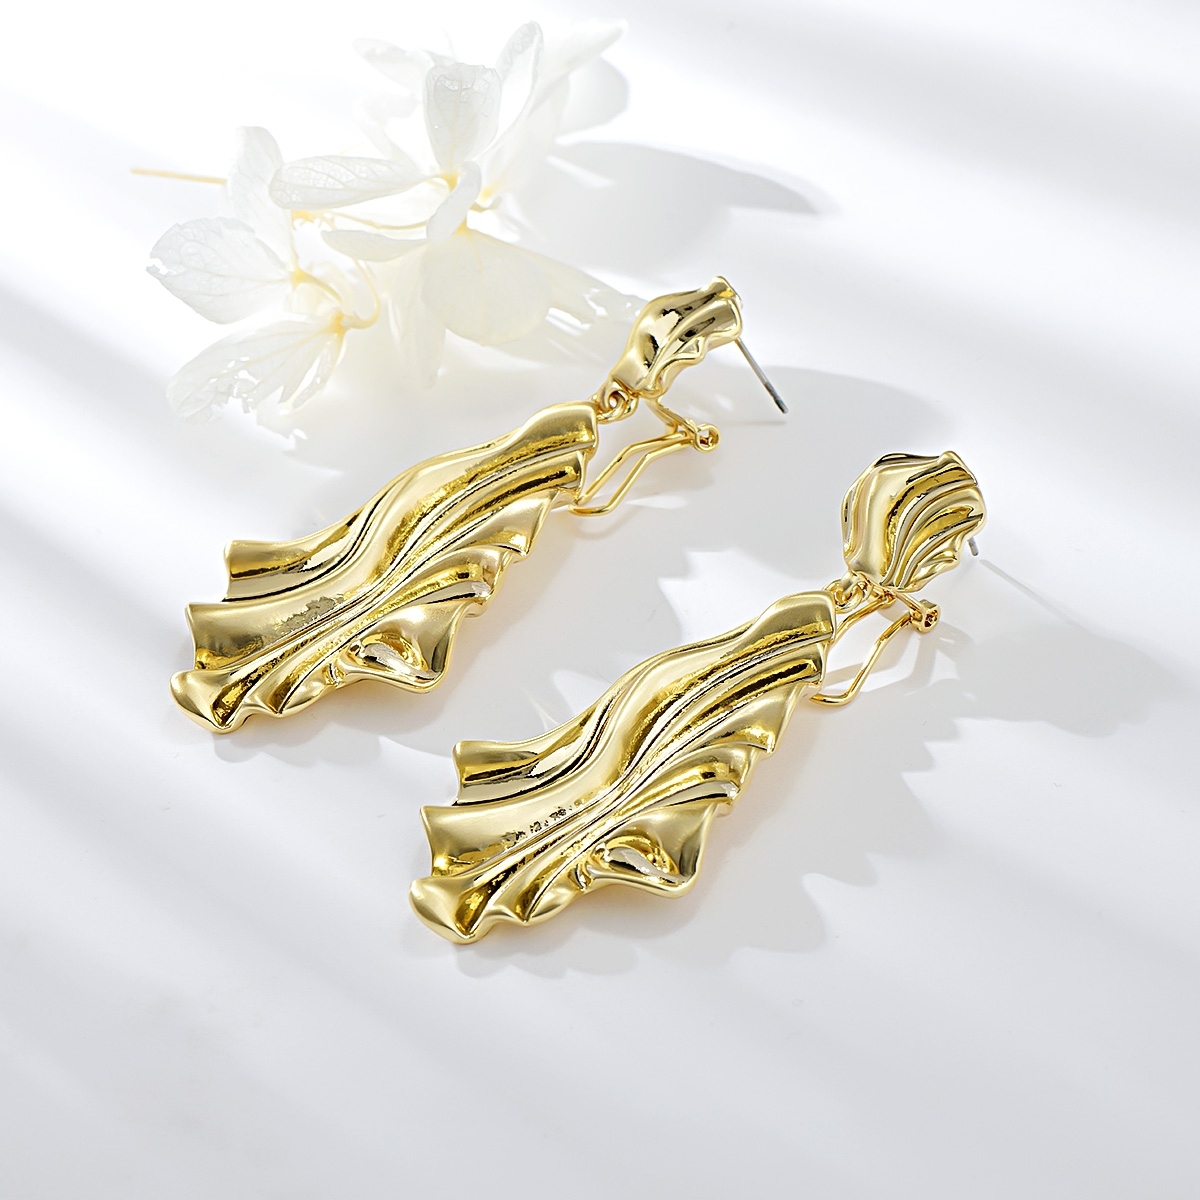 Reasonably Priced Zinc Alloy Gold Plated Dangle Earrings with Low Cost